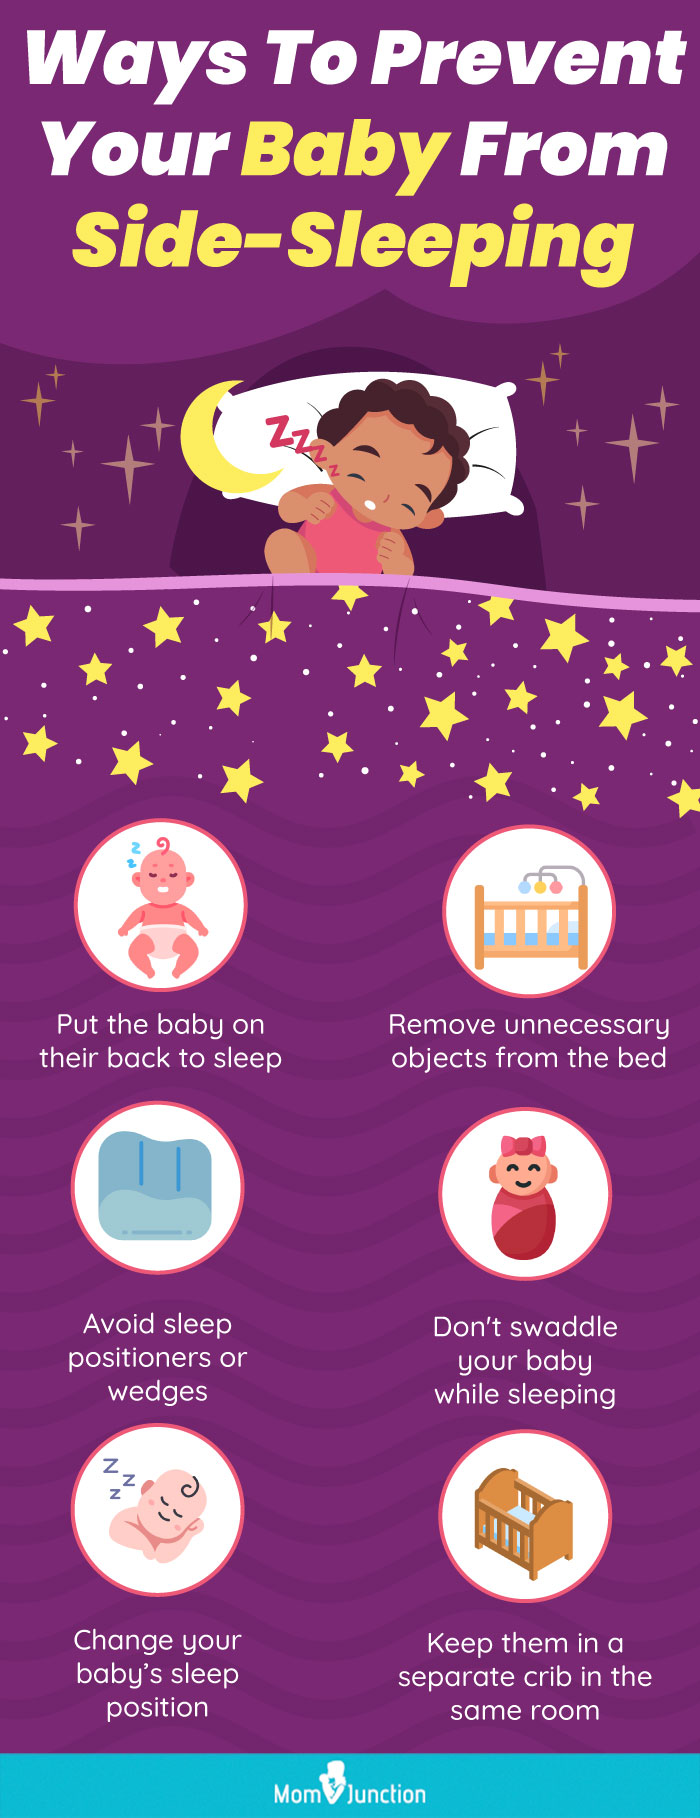 ways to prevent your baby from side sleeping [infographic]